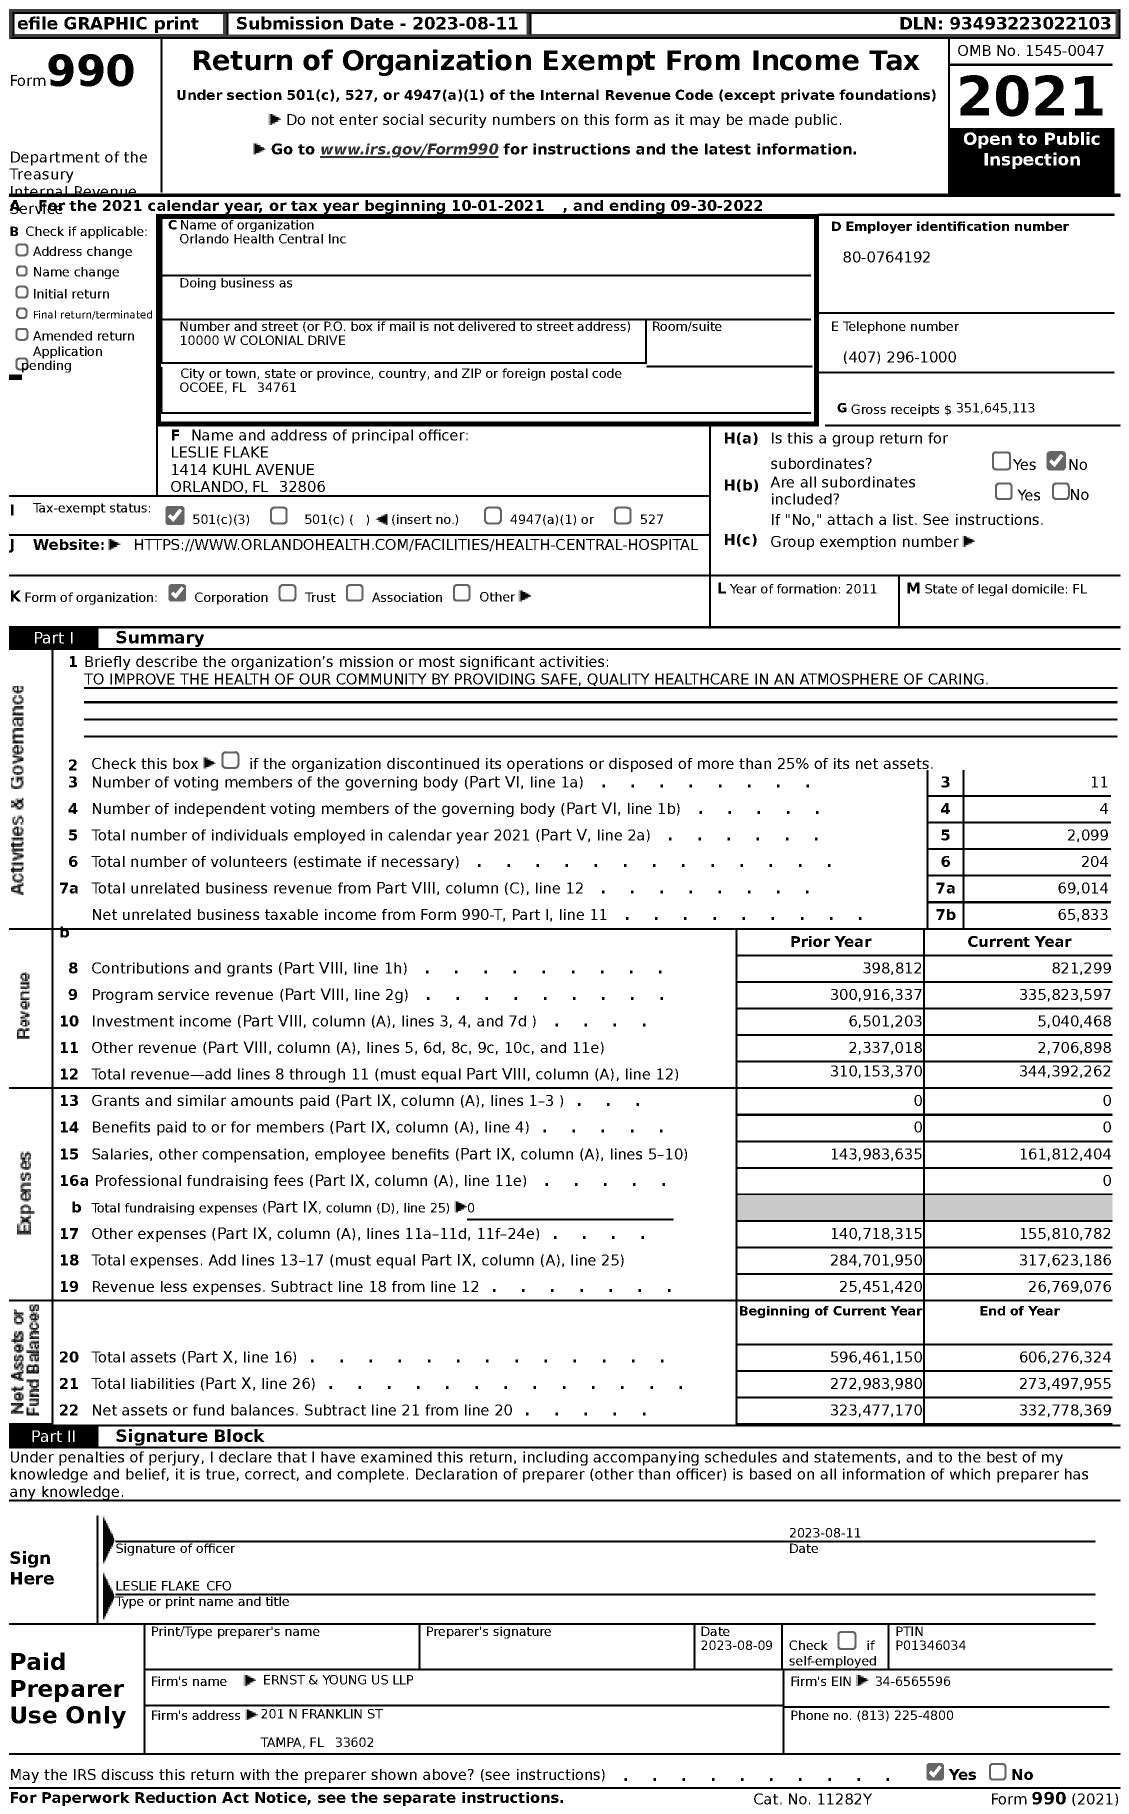 Image of first page of 2021 Form 990 for Health Central Hospital